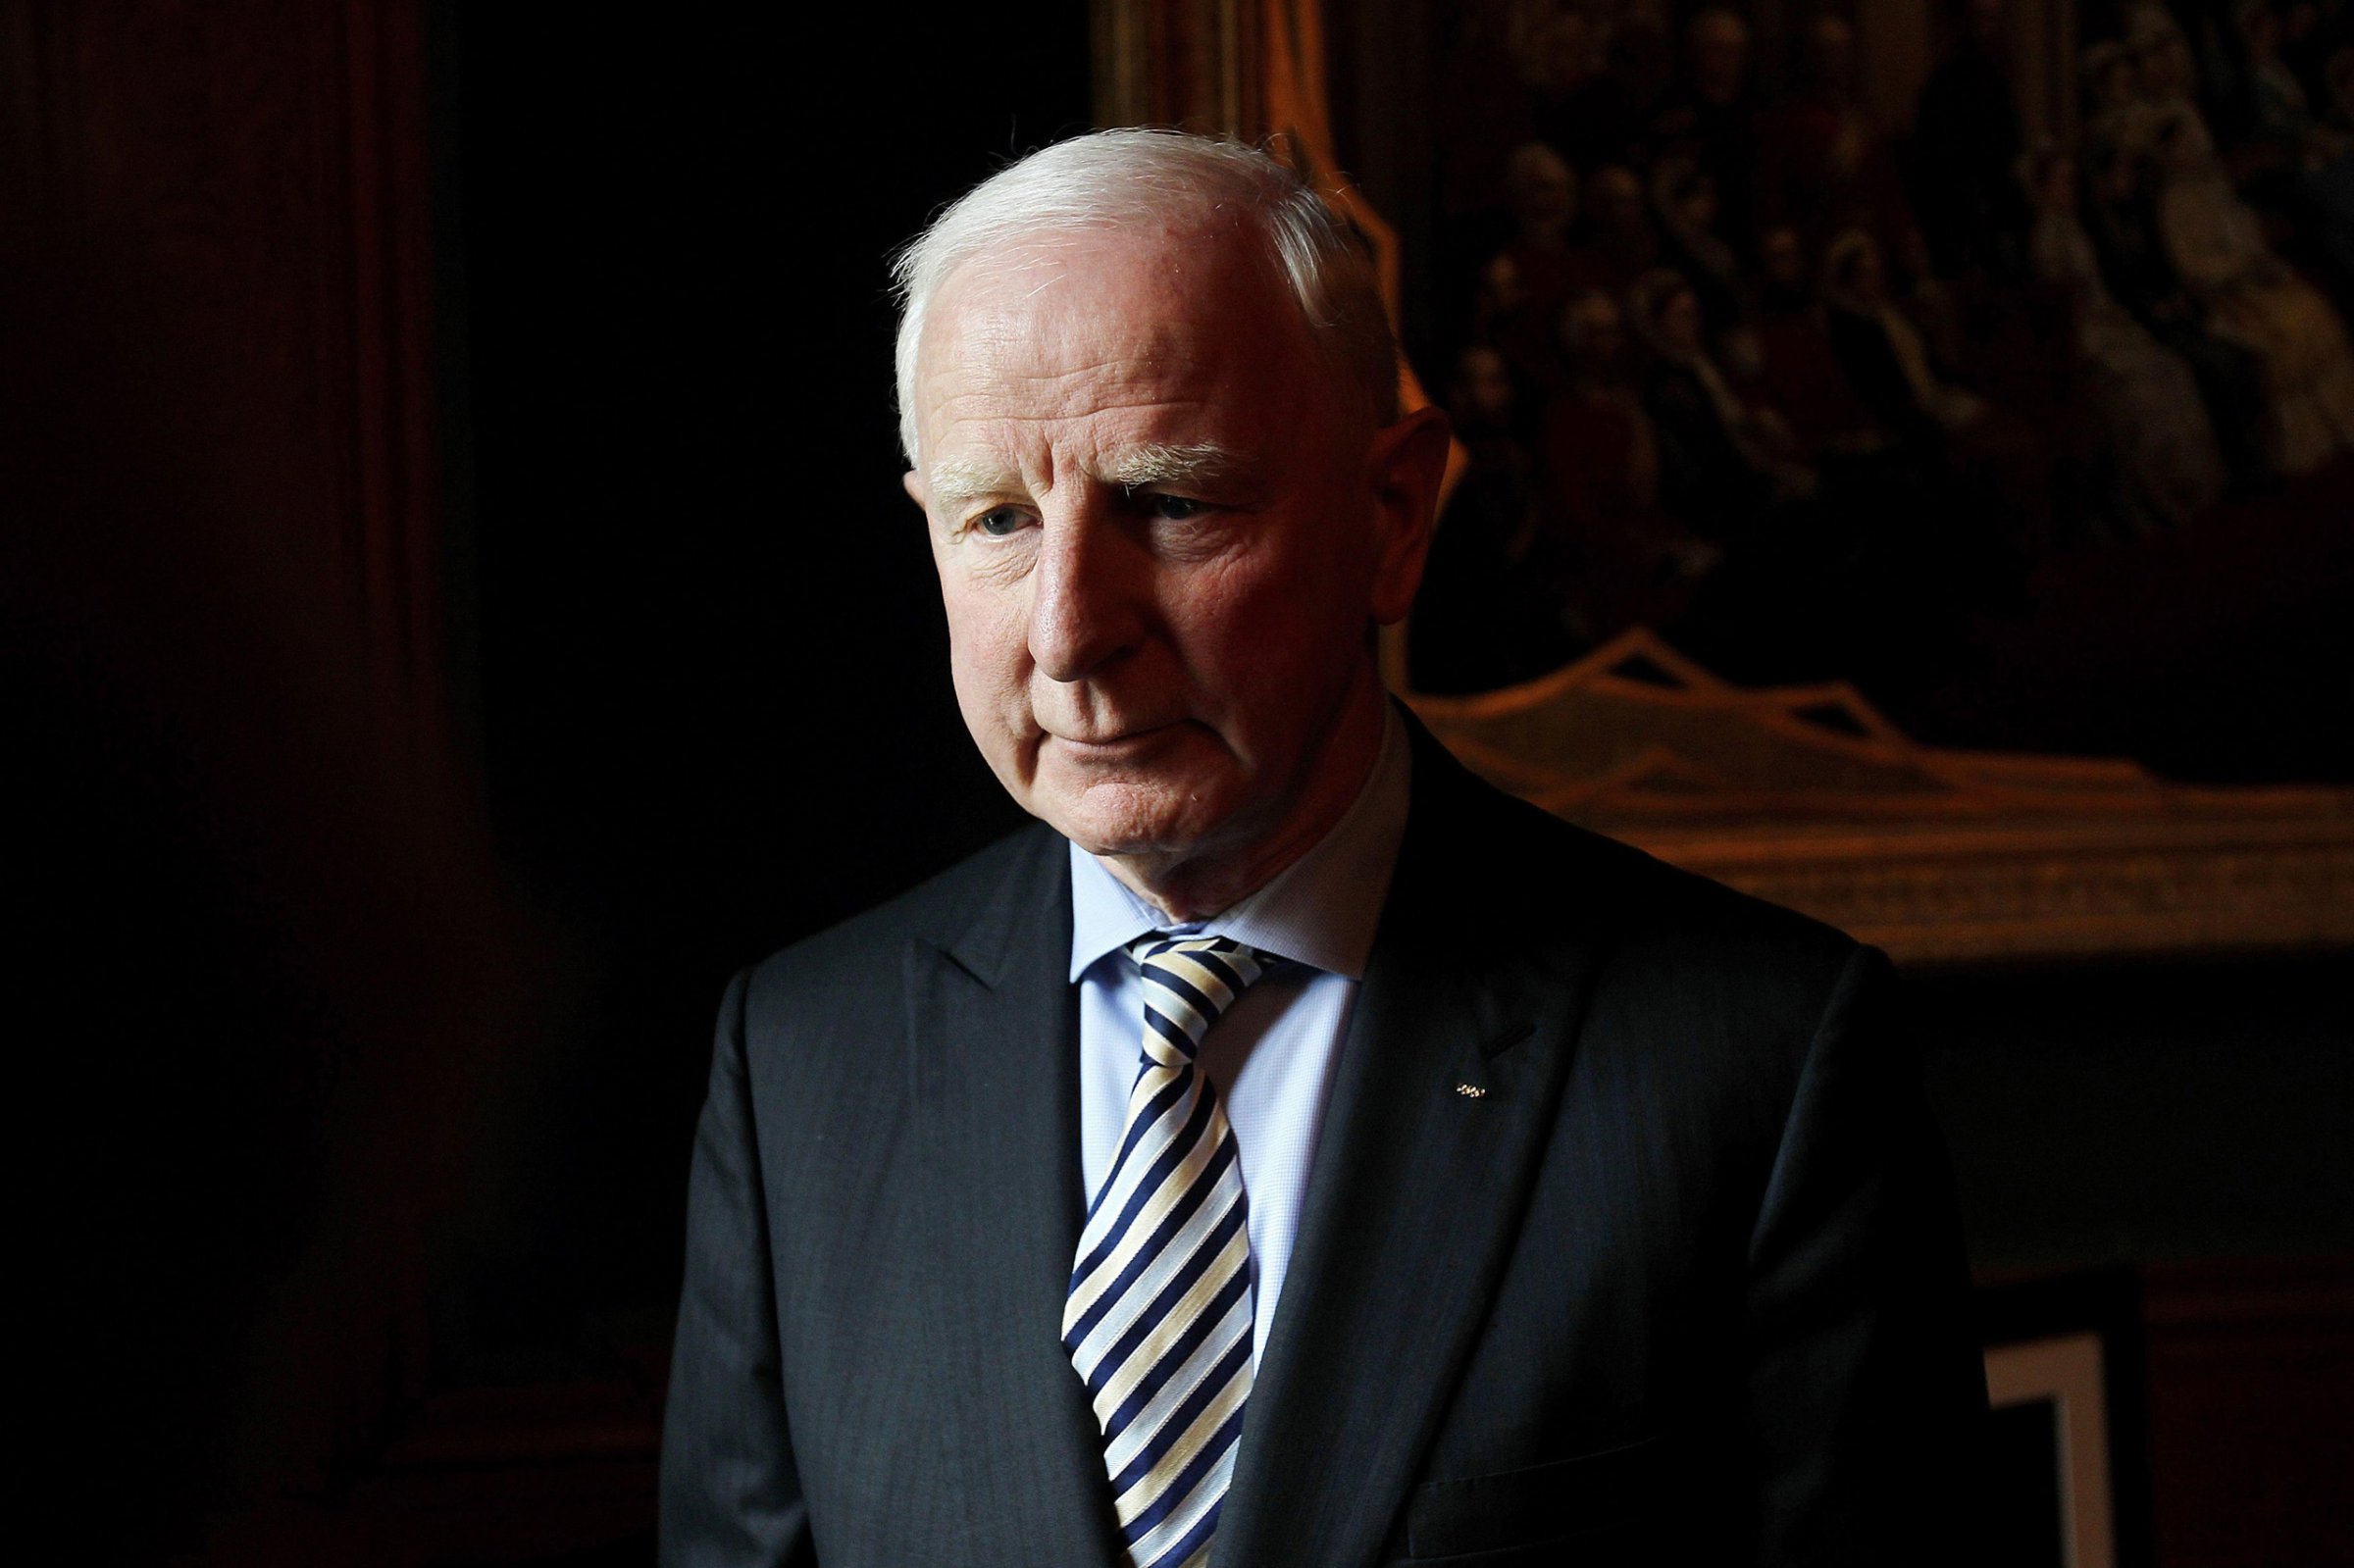 Patrick Hickey, President of the Olympic Council of Ireland in 2012.